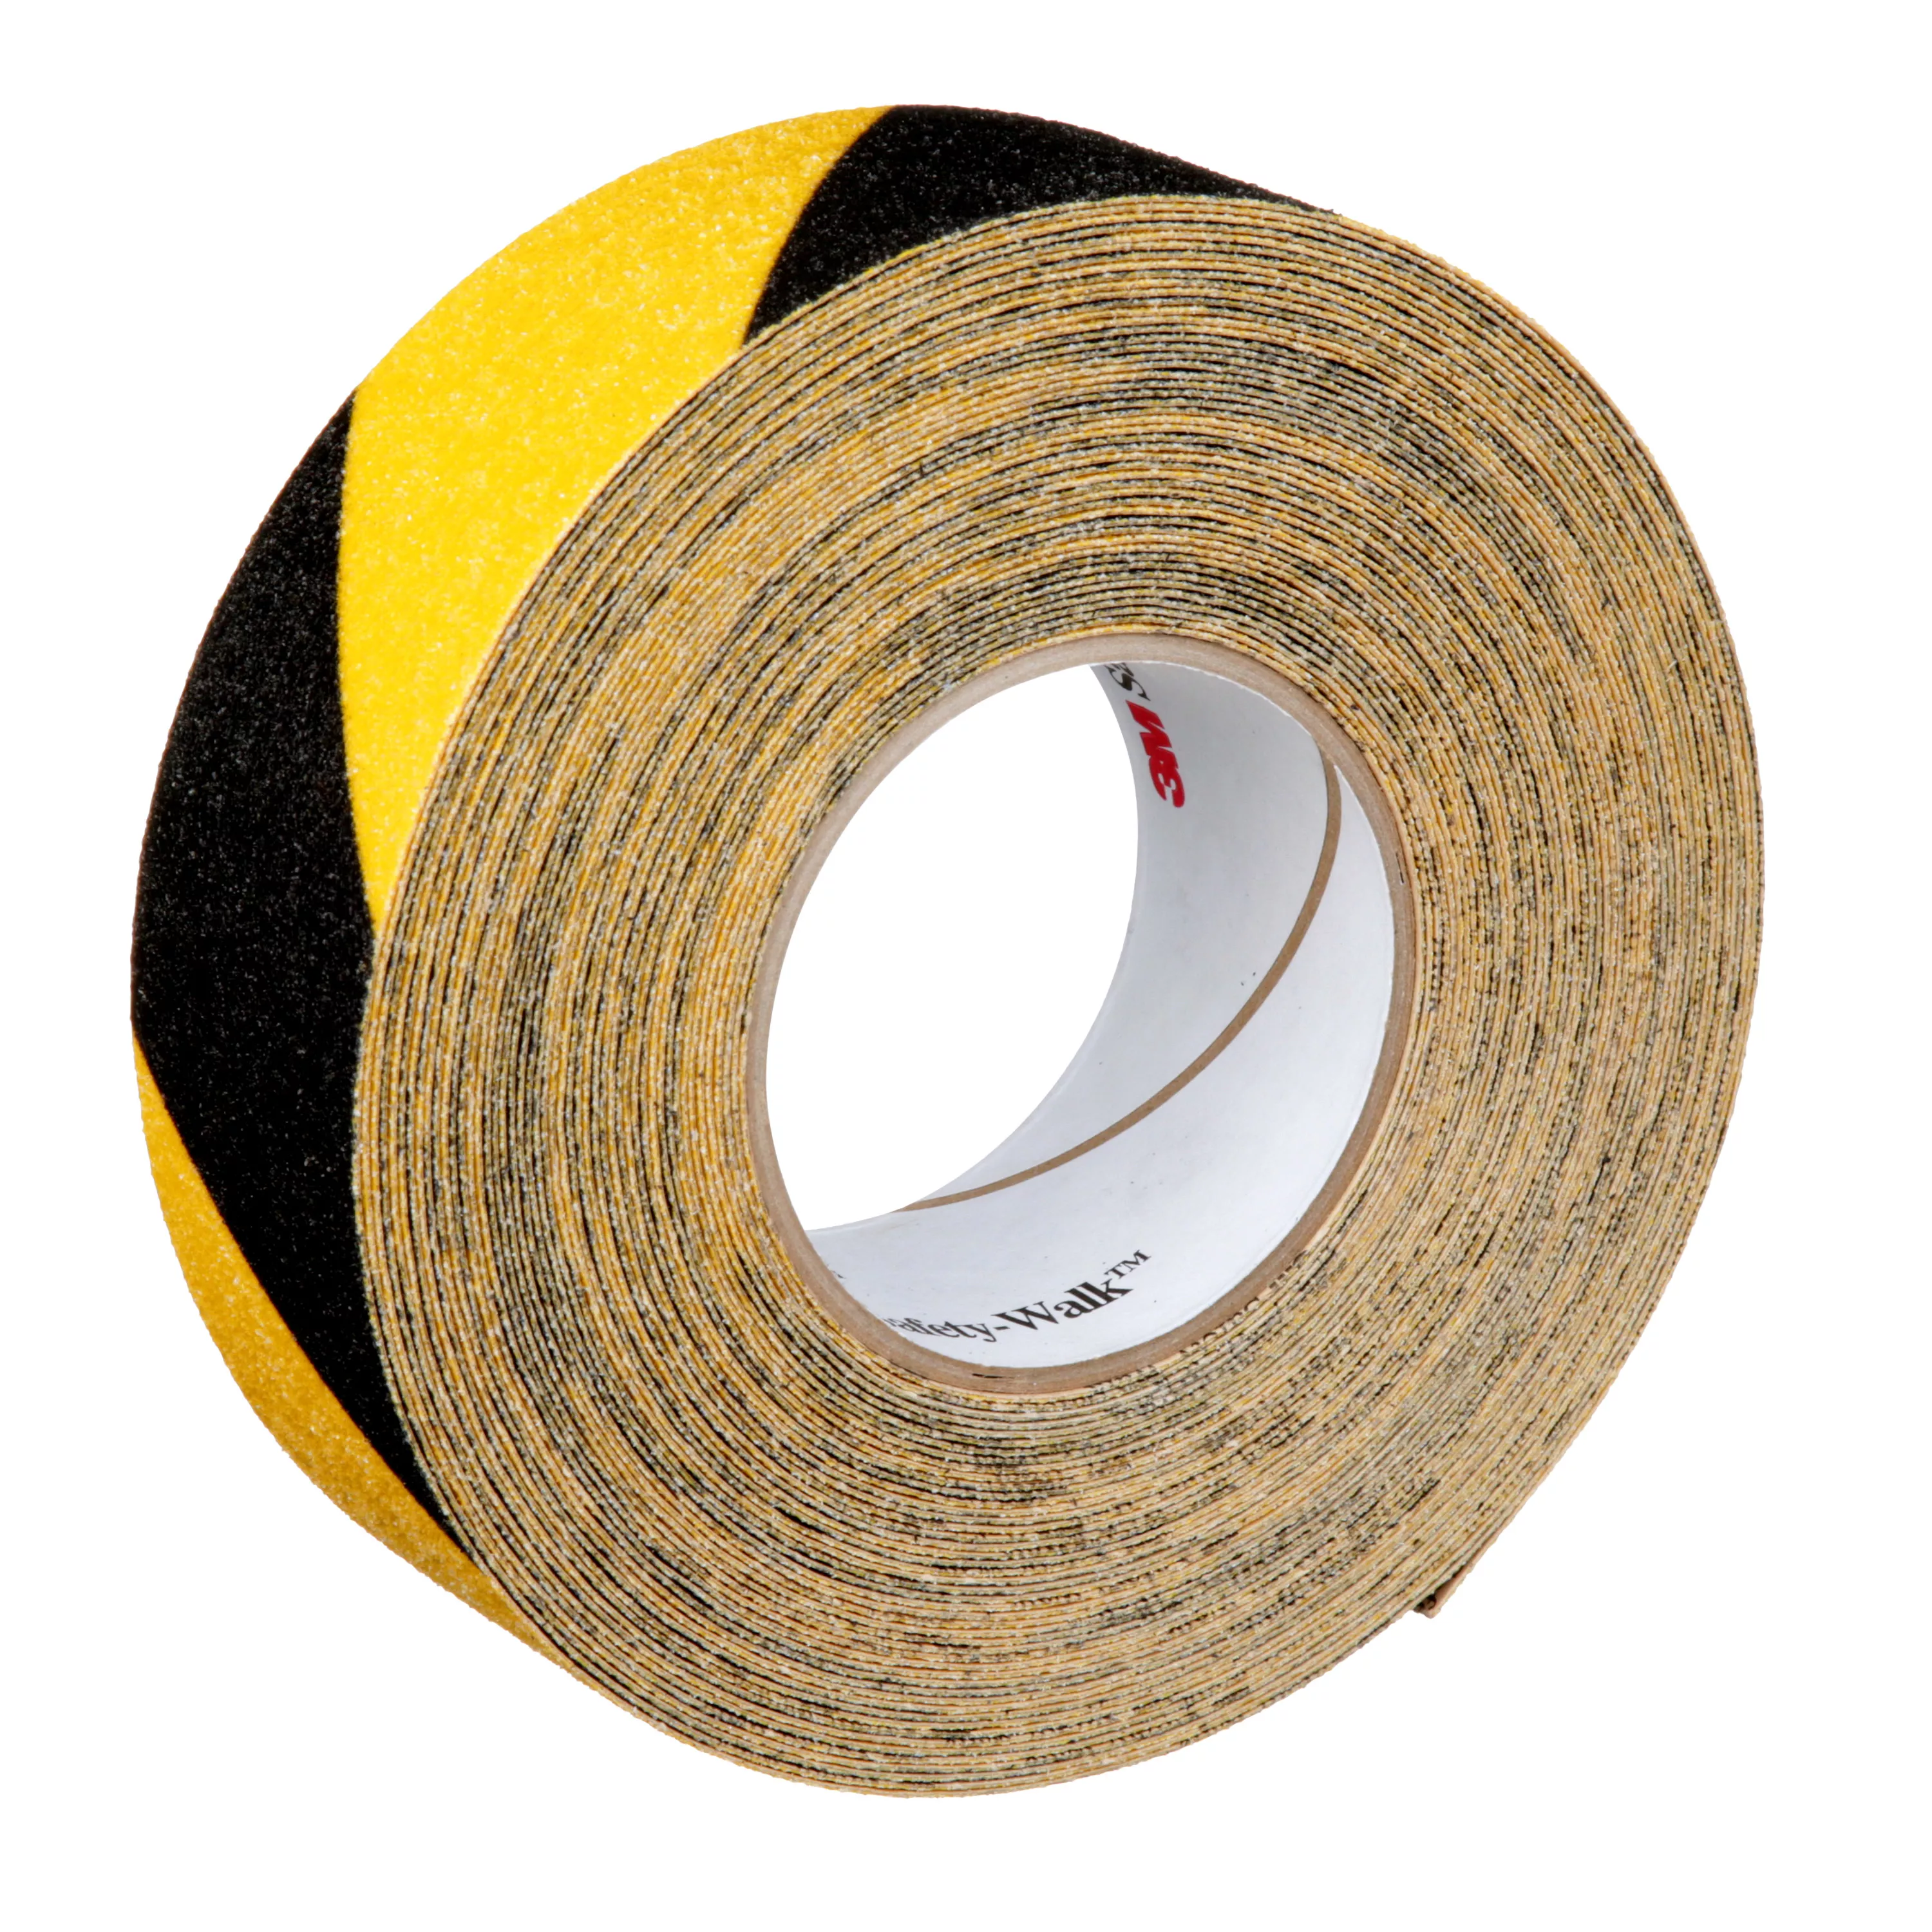 3M™ Safety-Walk™ Slip-Resistant General Purpose Tapes & Treads 613,
Black/Yellow Stripe, 2 in x 60 ft, 2 Rolls/Case